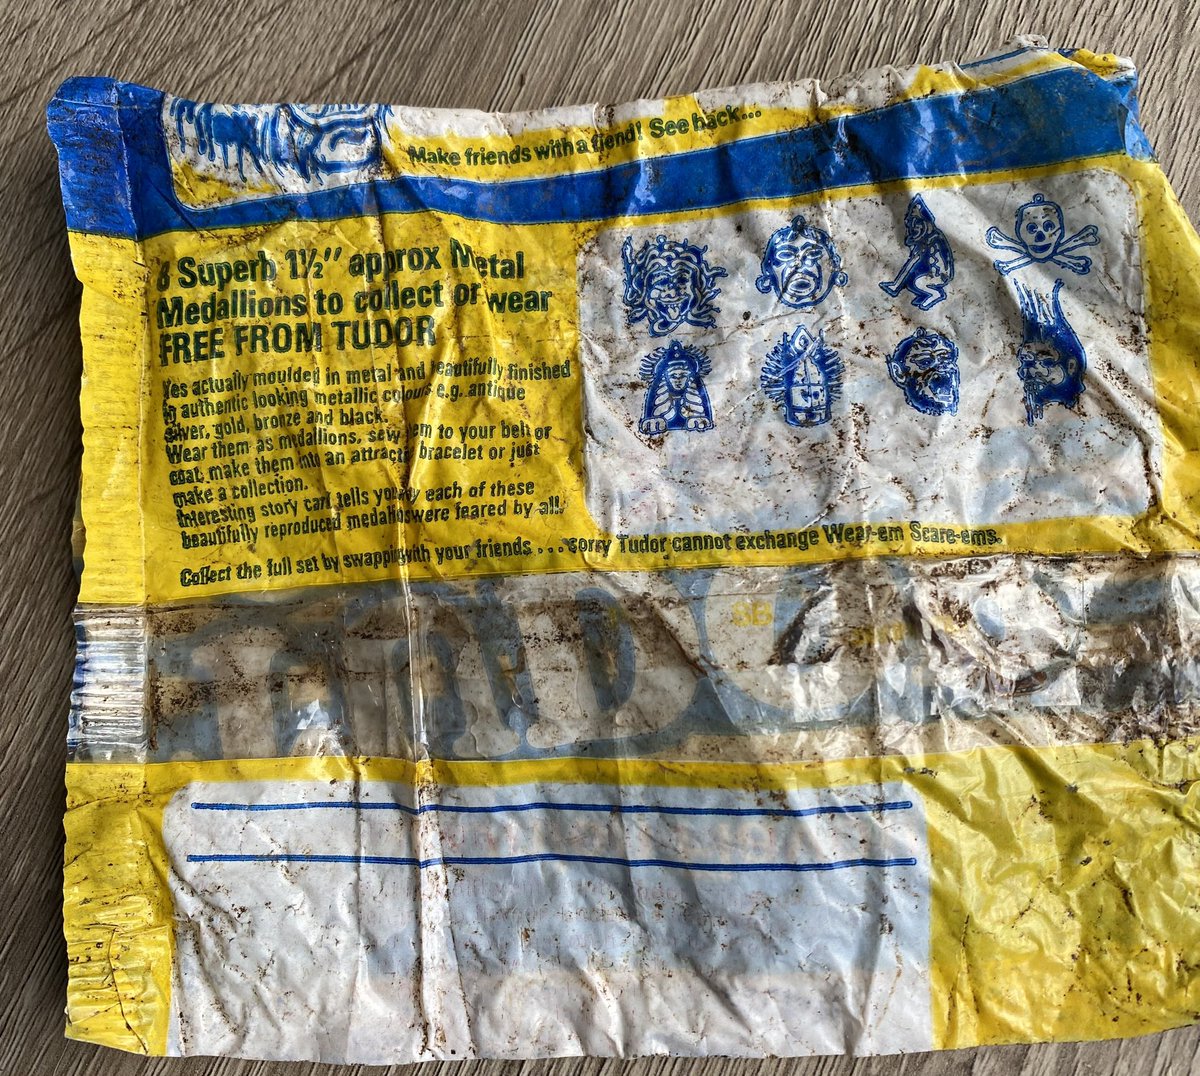 Found this #Tudor Crisps Pickled Onion packet in Ballymenoch Park today …. apparently the Wear-em Scare-em promotion was in 1974 so this packet is 49 years old, wow! 😮
@KeepNIBeautiful @isupportlhlh @2minuteHQ #BigSpringClean #litterpick